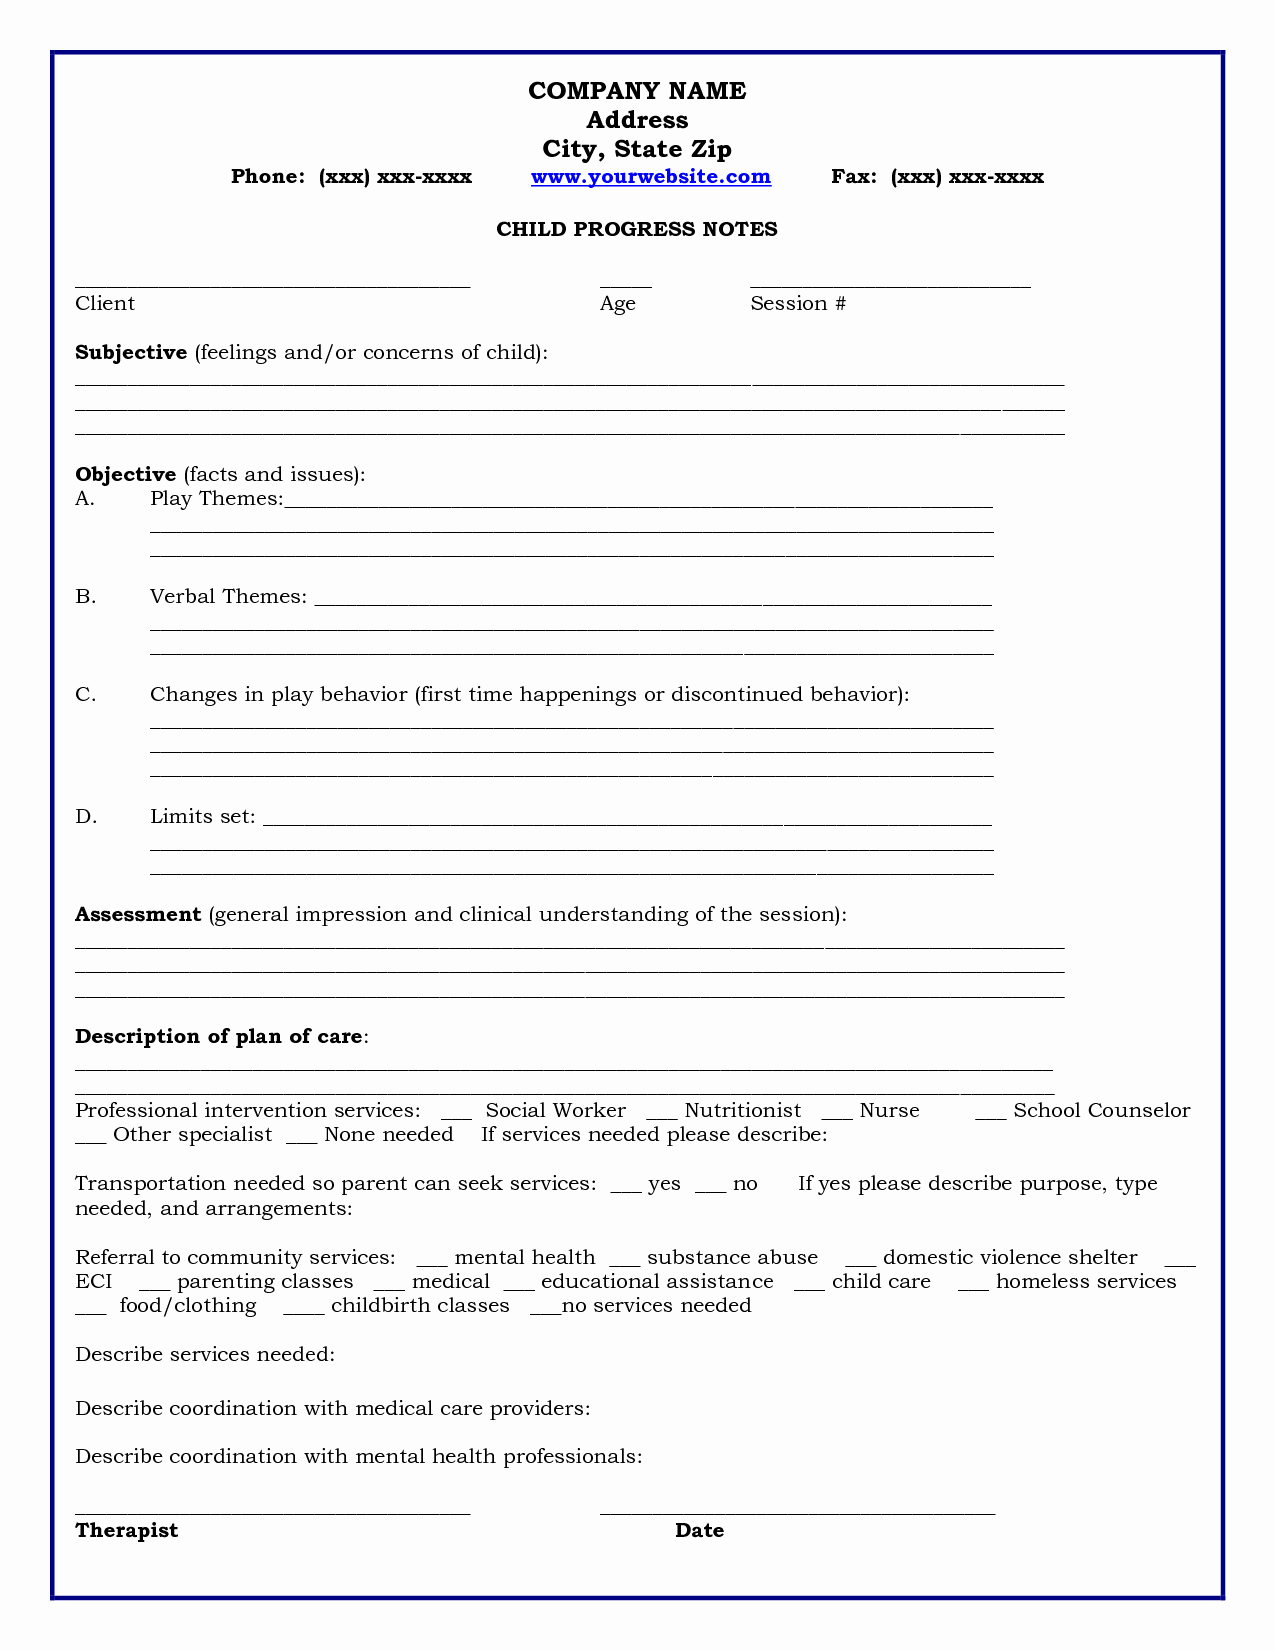 Clinical Progress Notes Template